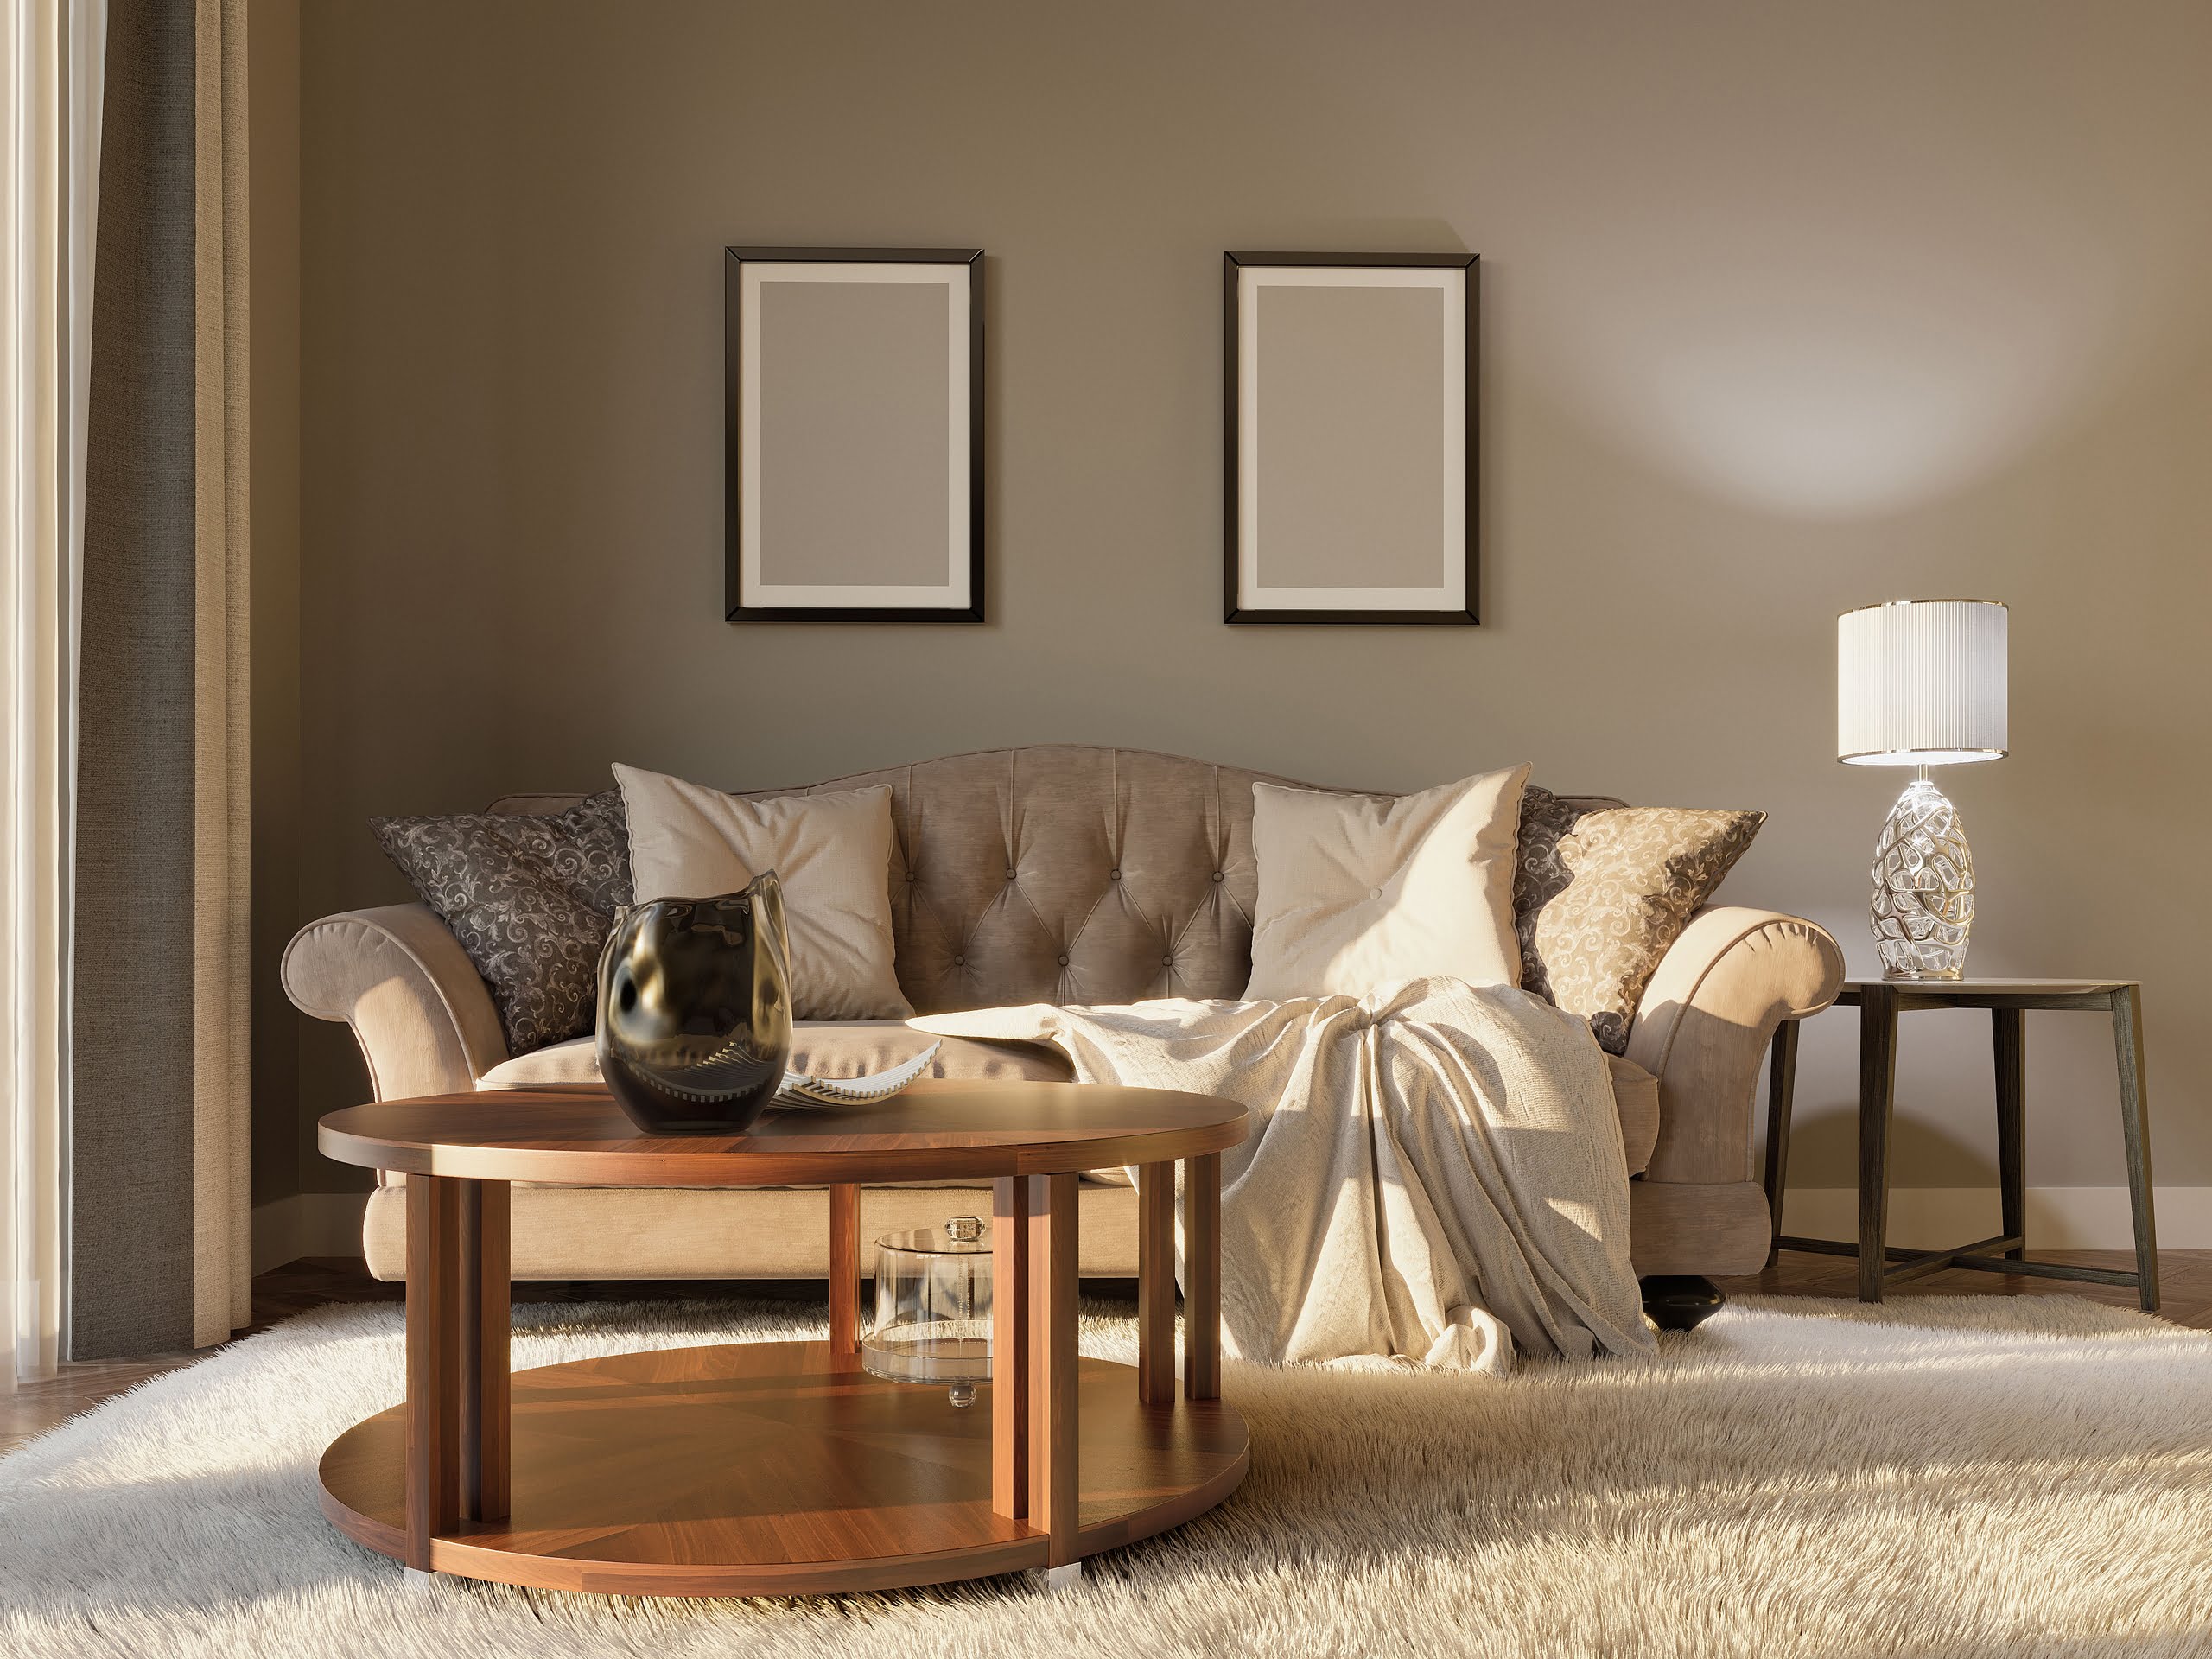 30 Brown Wall D 233 cor Ideas Collection a day